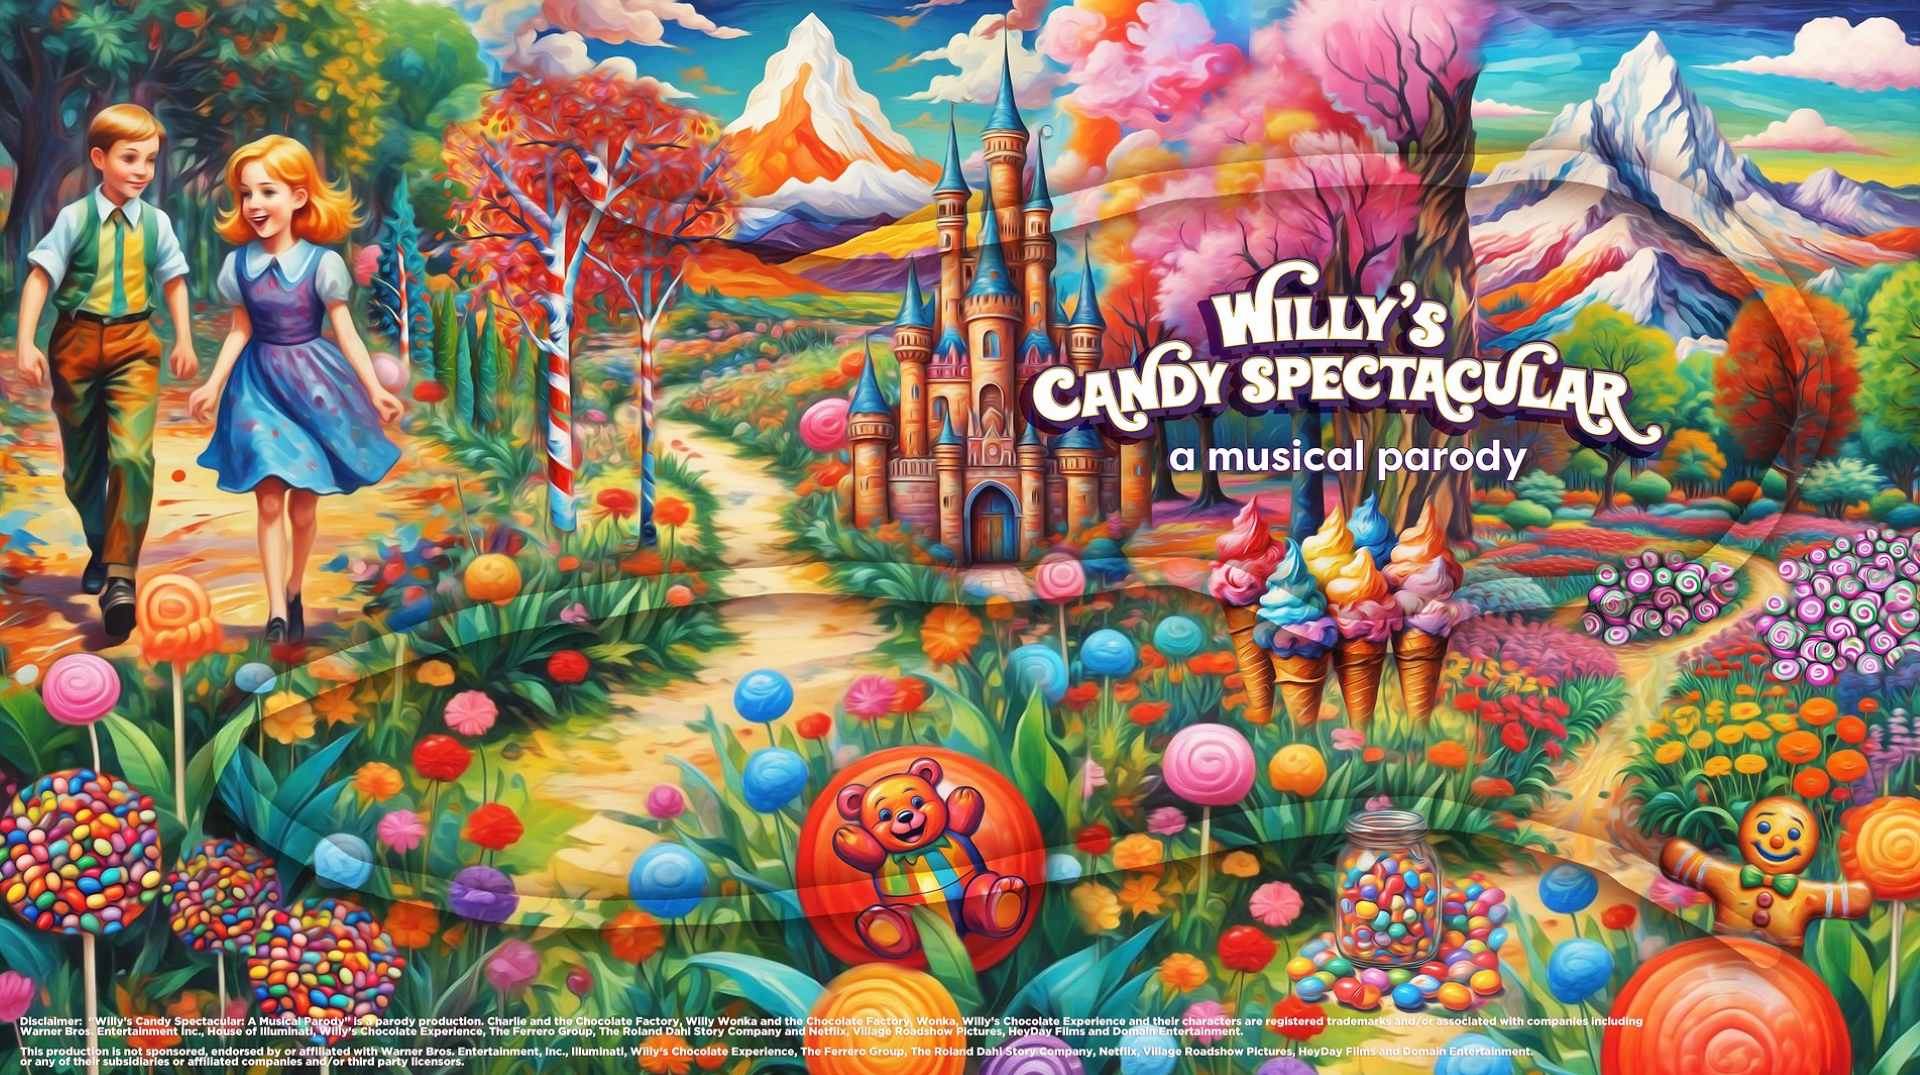 Willy's Candy Spectacular: A Musical Parody